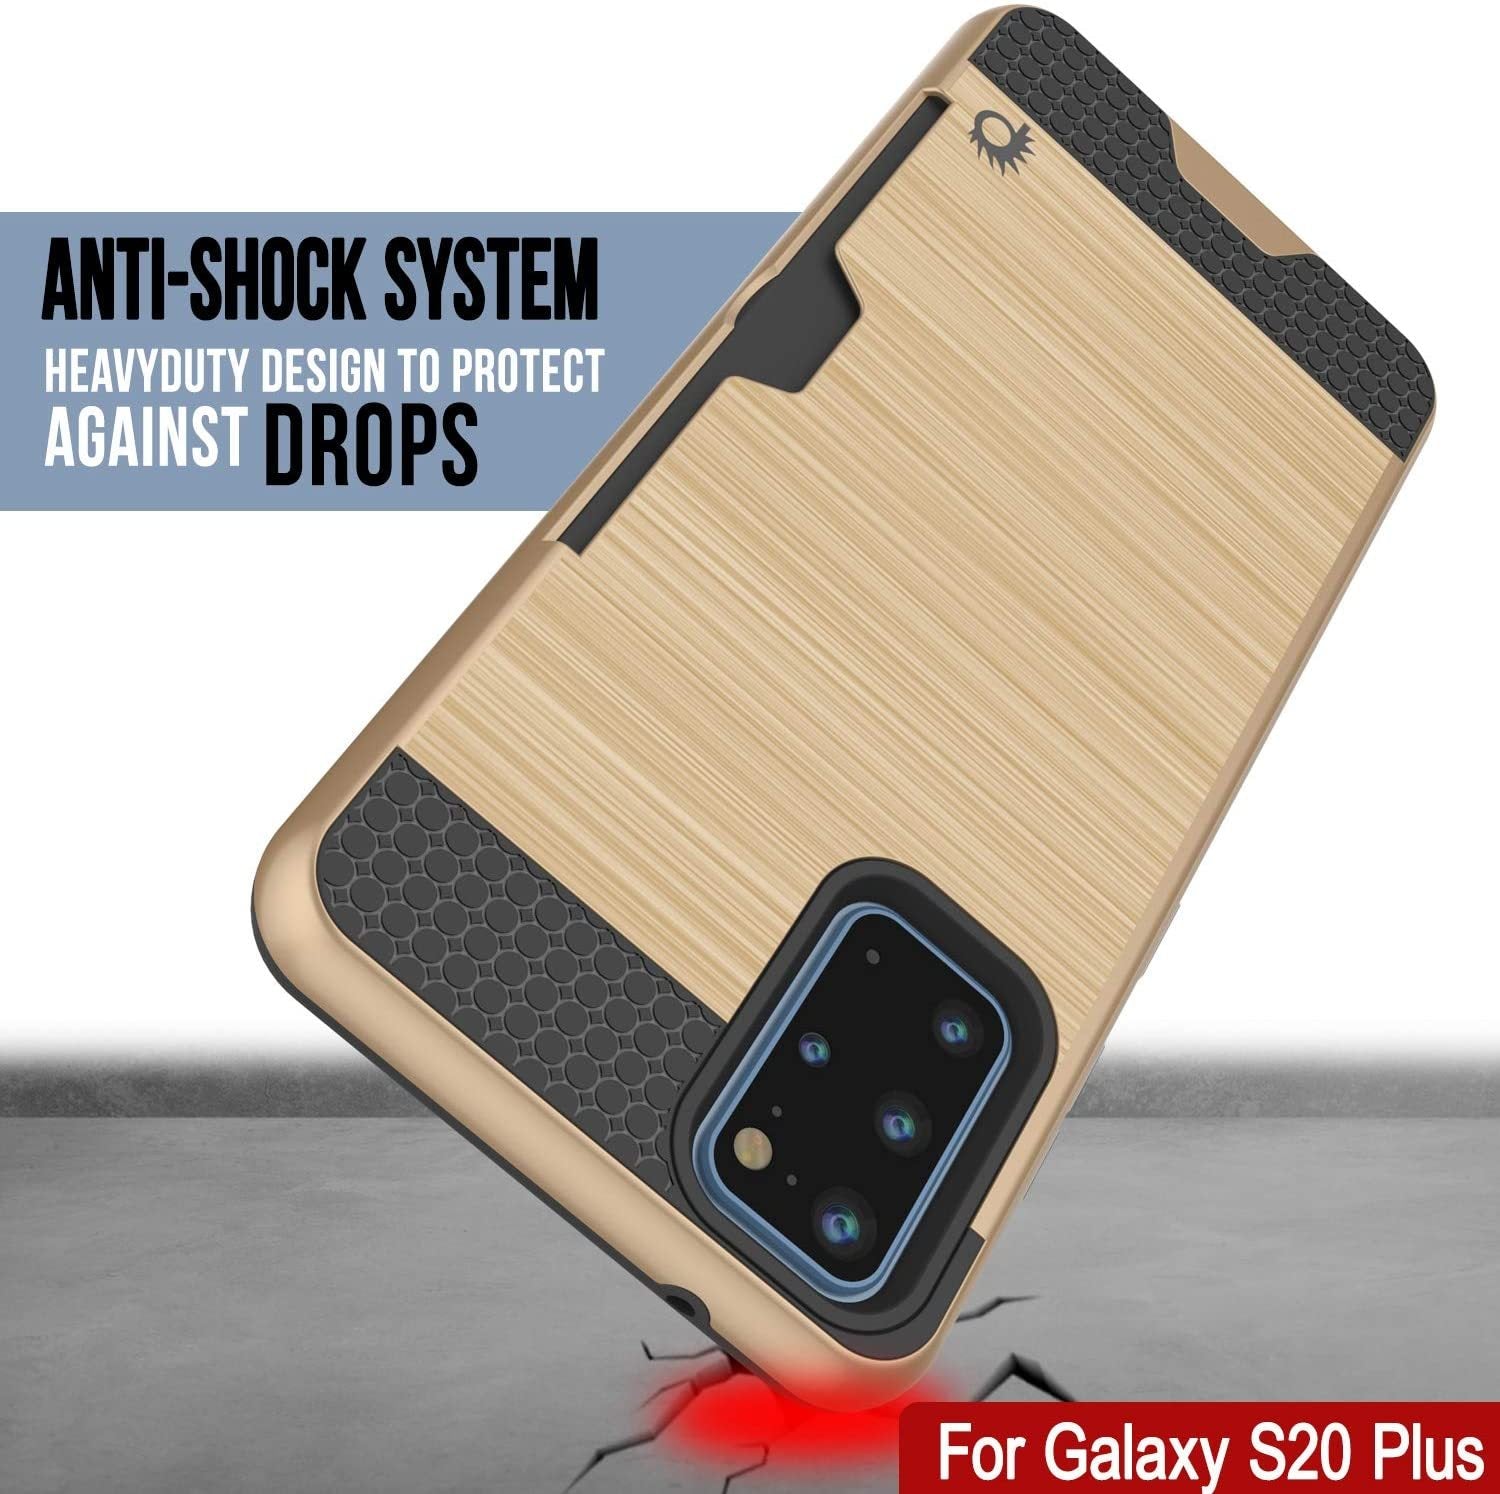 Galaxy S20+ Plus  Case, PUNKcase [SLOT Series] [Slim Fit] Dual-Layer Armor Cover w/Integrated Anti-Shock System, Credit Card Slot [Gold]